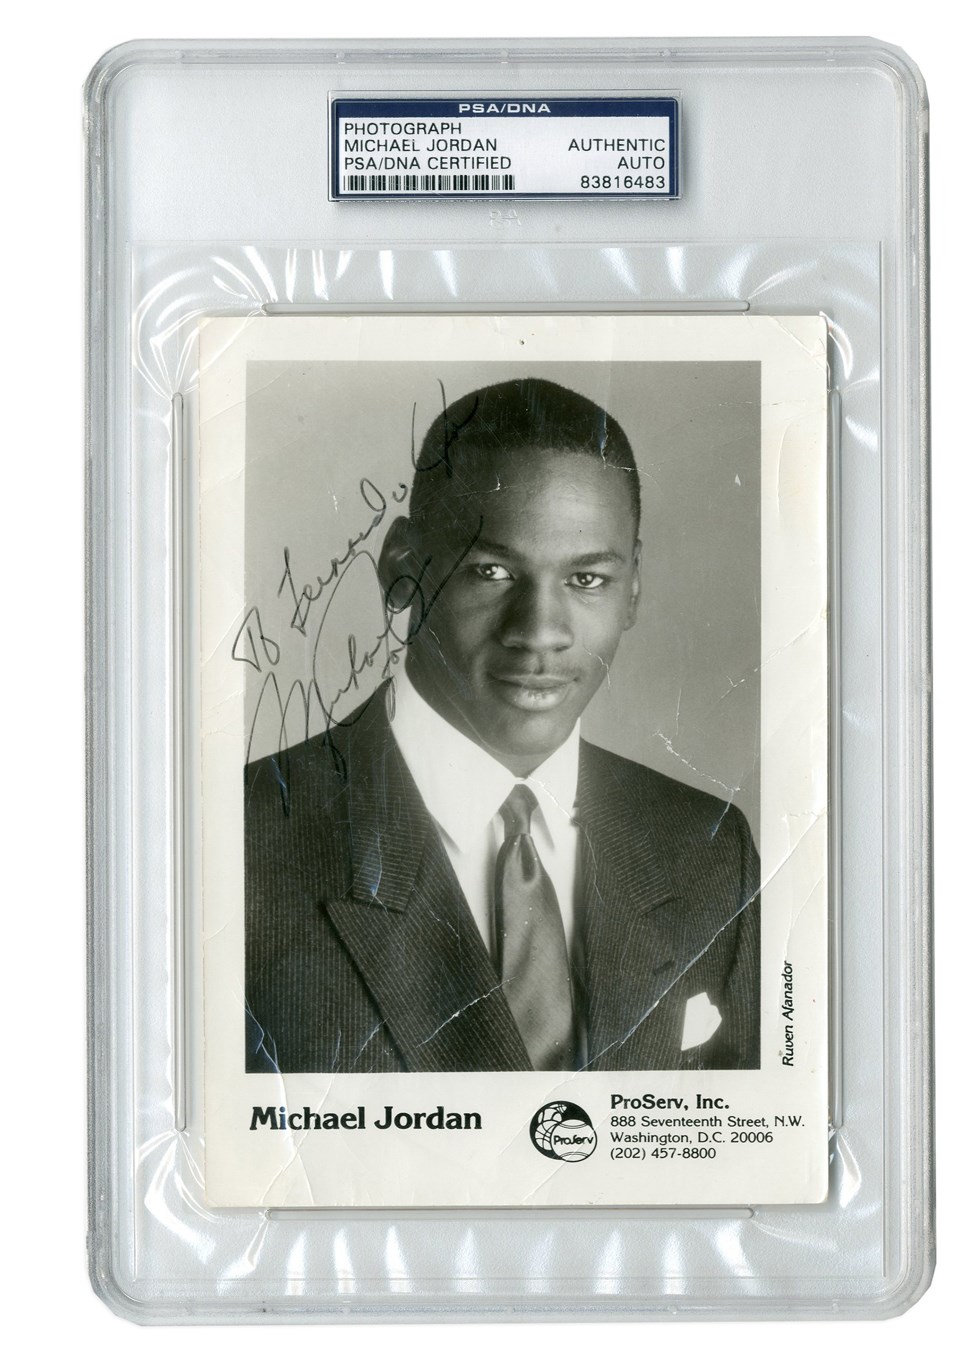 - 1985 Michael Jordan Signed Promotional Photo from One and Only Public Signing (PSA/DNA)